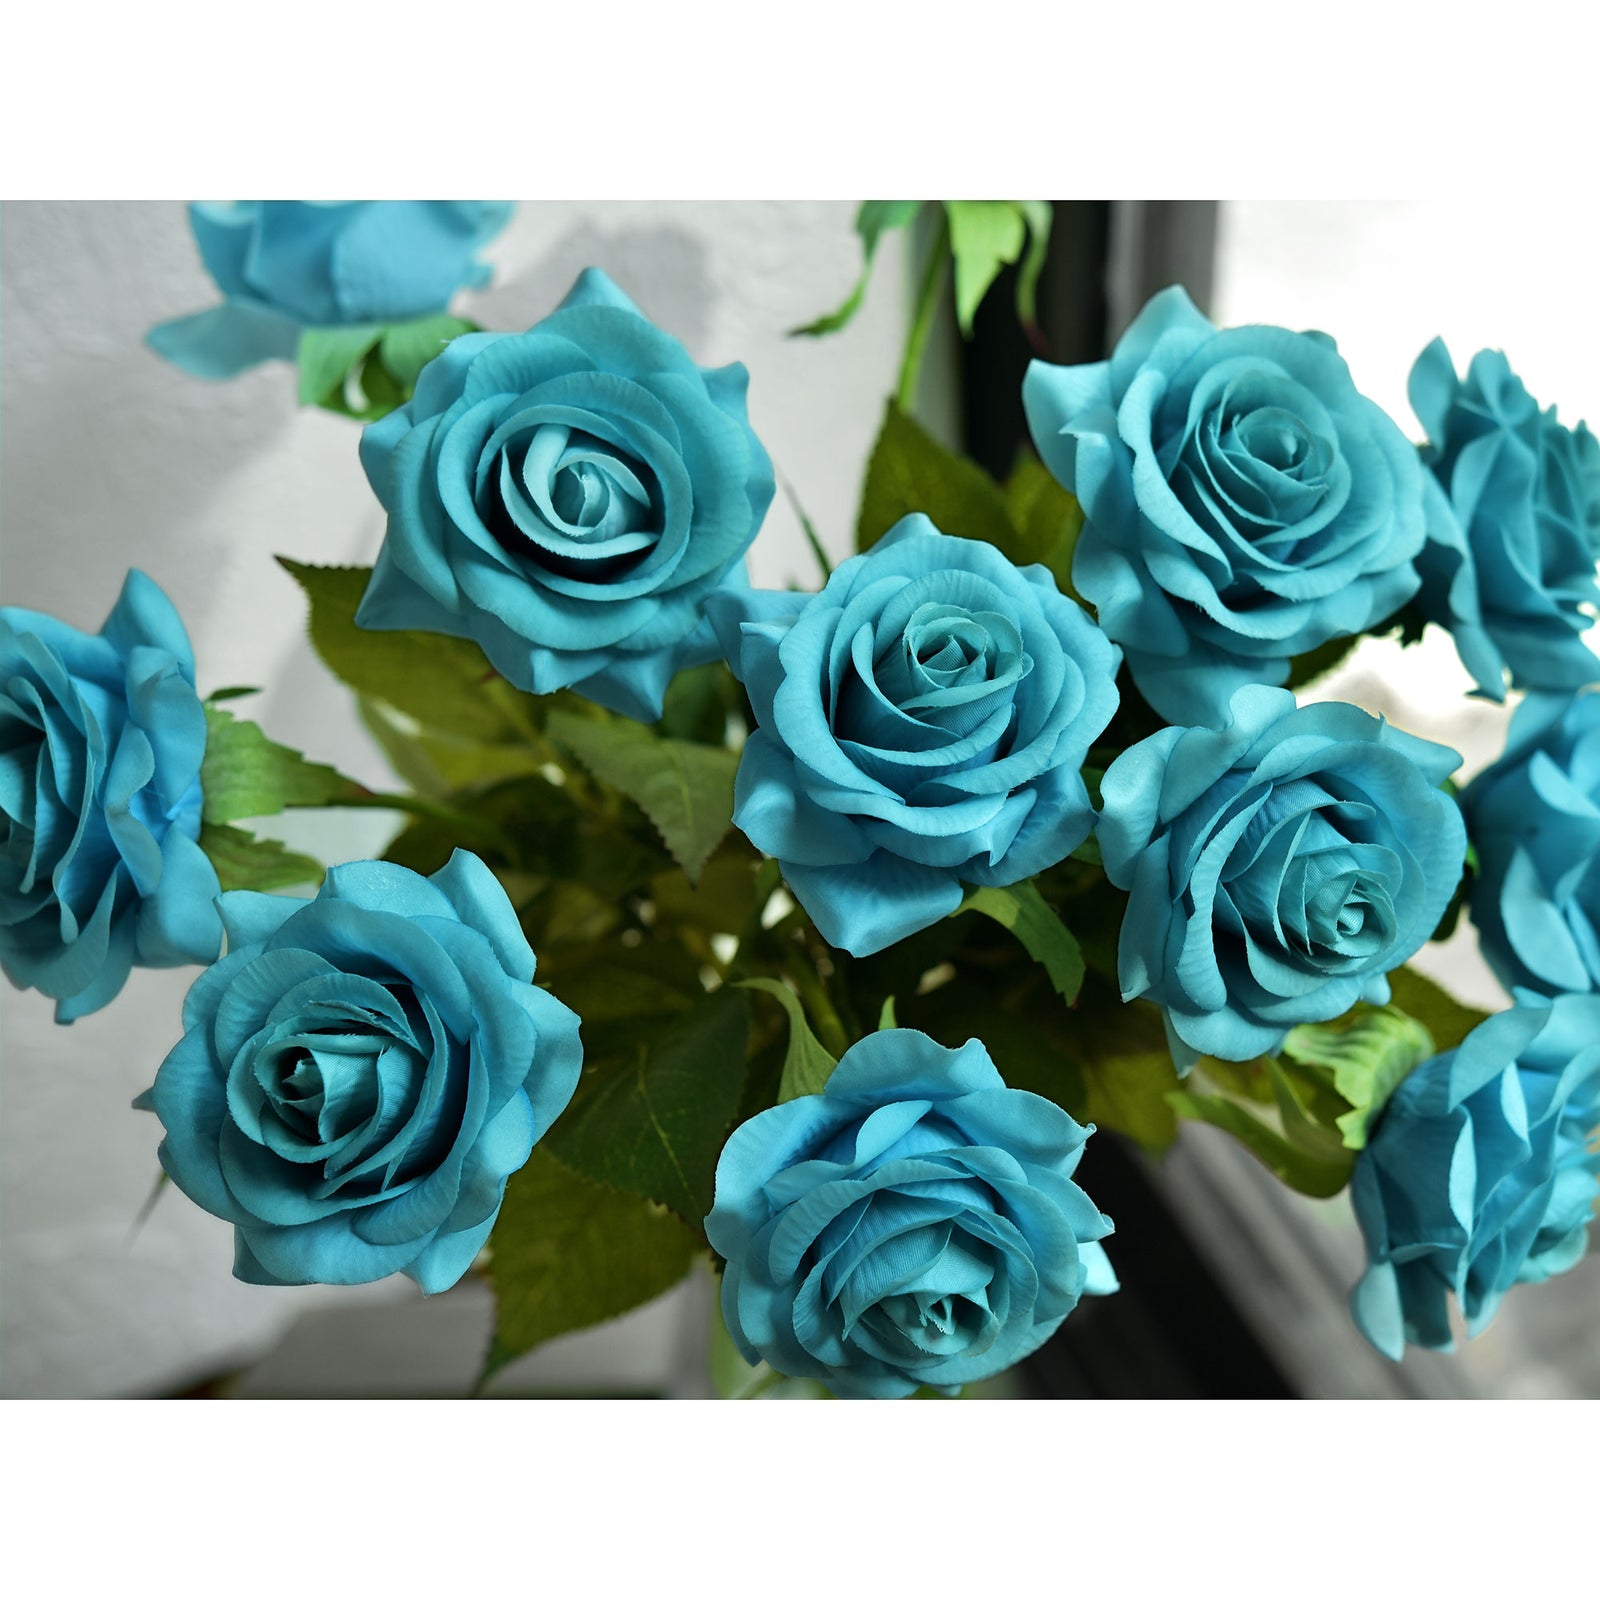 Real Touch 10 Stems Teal Silk Artificial Roses Flowers ‘Petals Feel and Look like Fresh Roses'